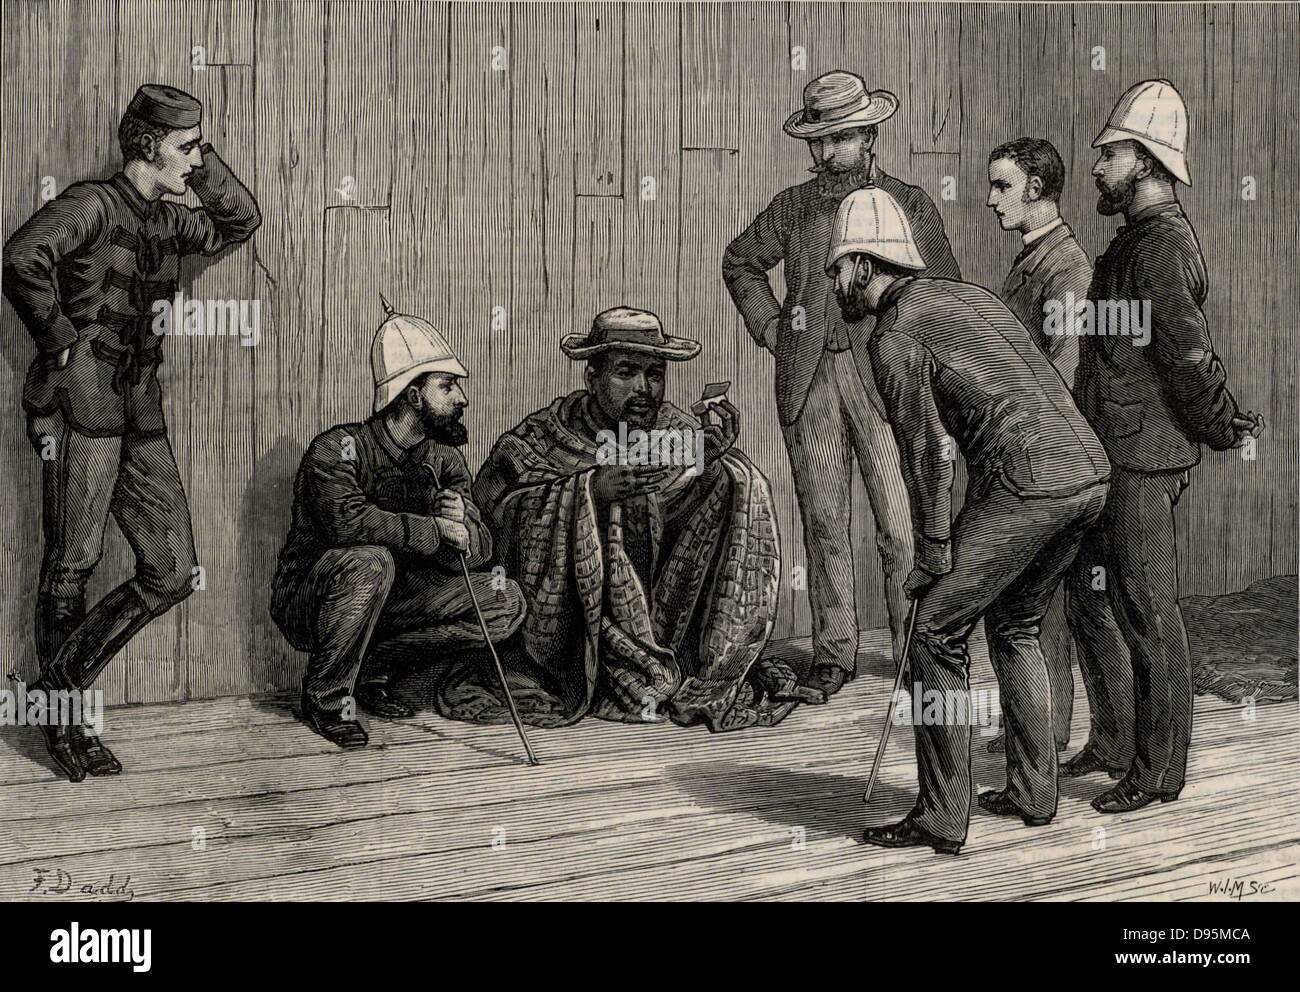 Cetawayo or Cetewayo (d1884) king of Zululand, South Africa 1873-1883.  During the Anglo-Zulu war of 1879 Cetawayo was defeated at Ulundi and taken prisoner.  Here he is shown a prisoner in Cape Town receiving visitors. Illustration by Frank Dadd (1851-1929) English artist and illustrator.  From 'The Illustrated London News' (London, 25 October 1879). Engraving. Stock Photo